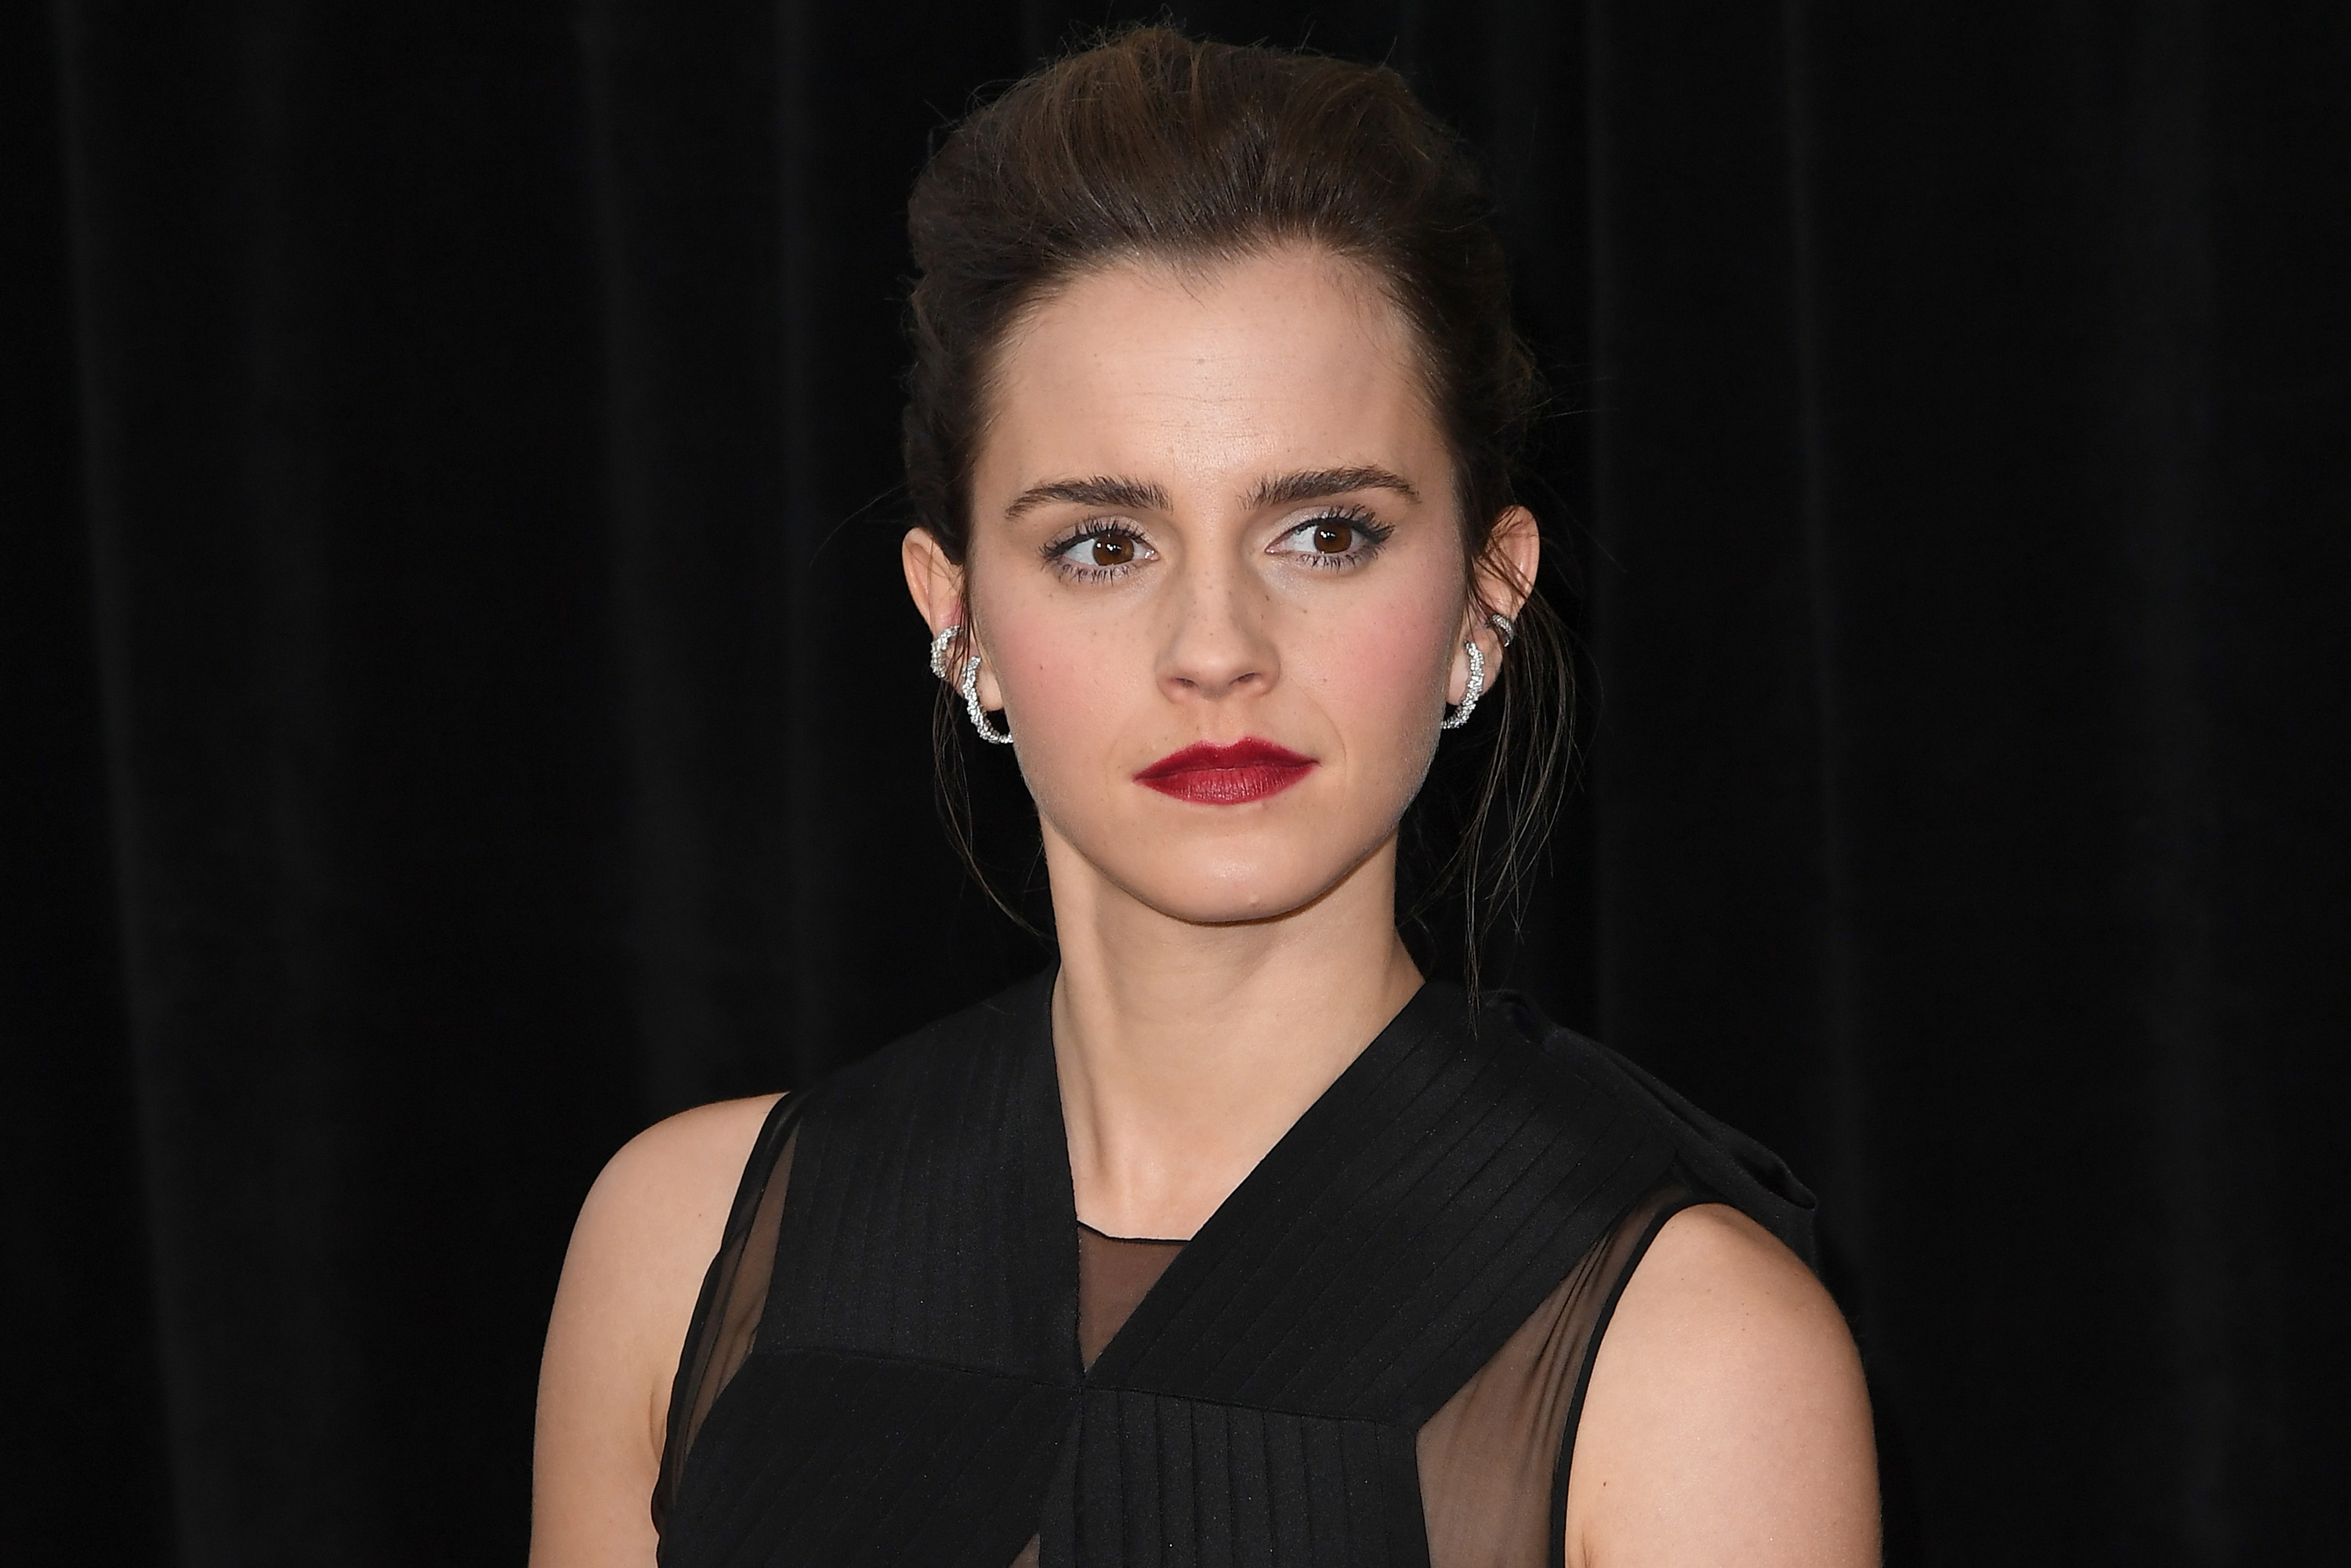 deane matthews recommends emma watson leaked icloud photos pic